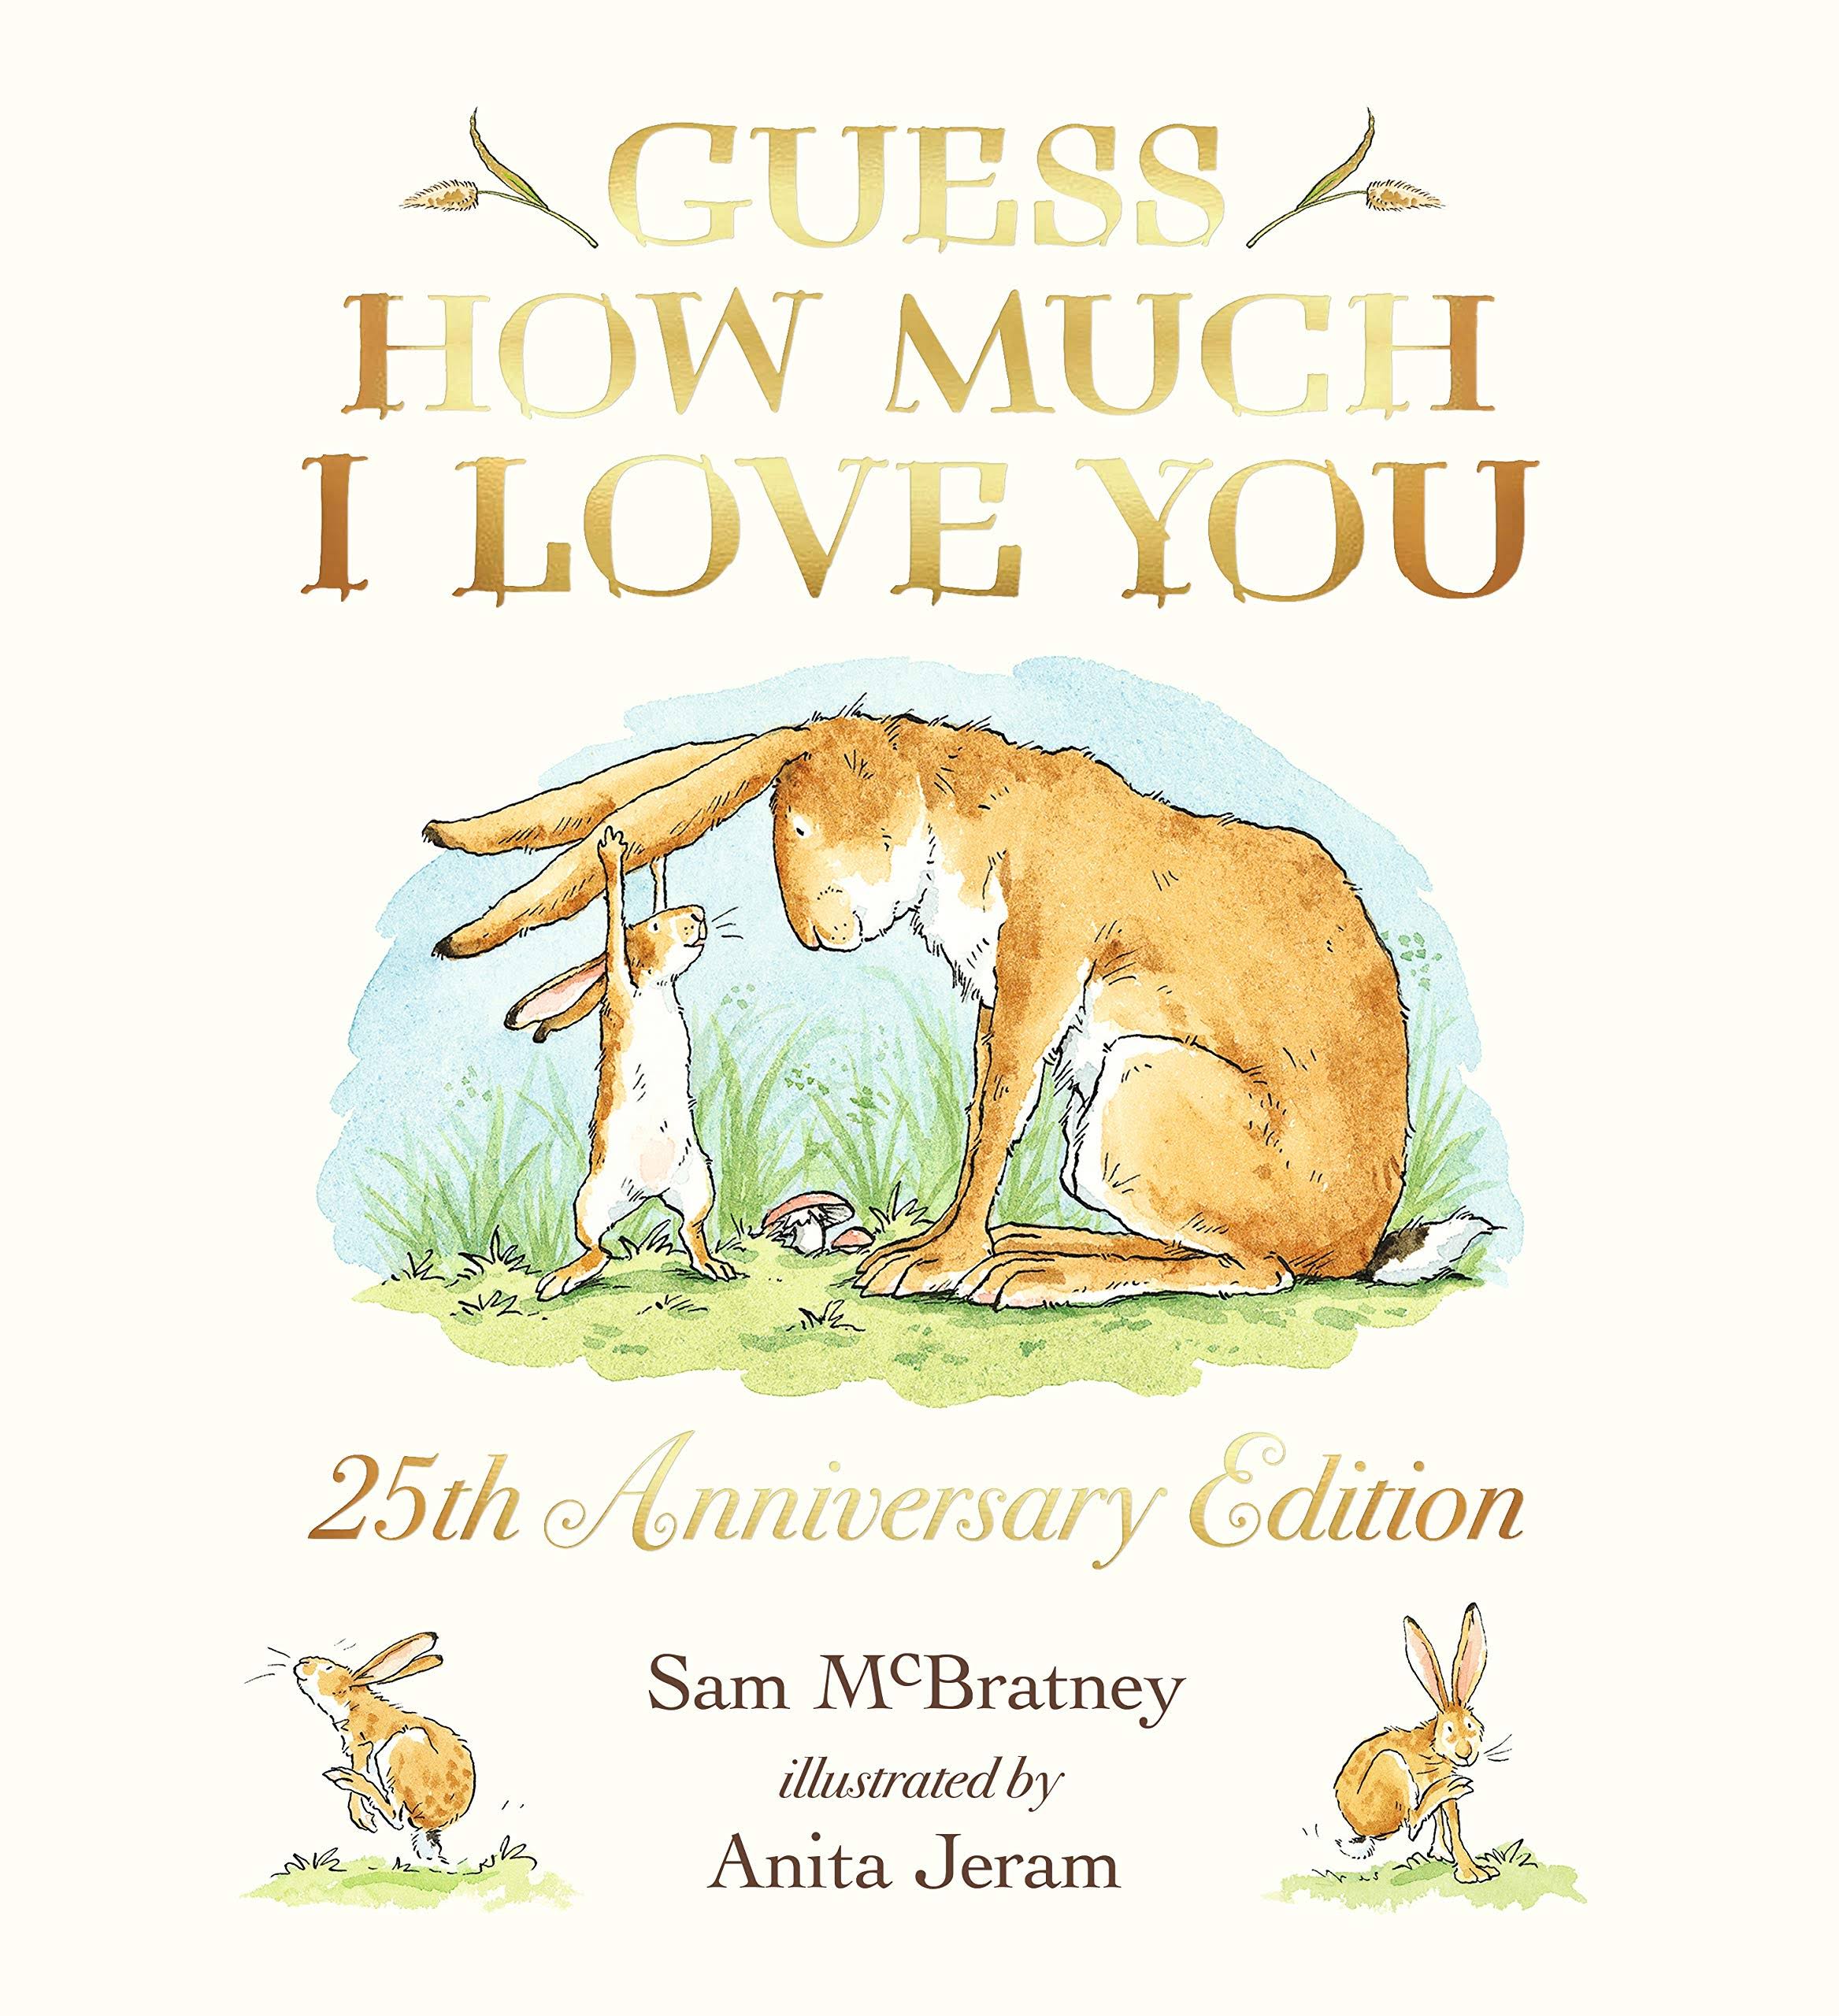 Guess How Much I Love You [Book]